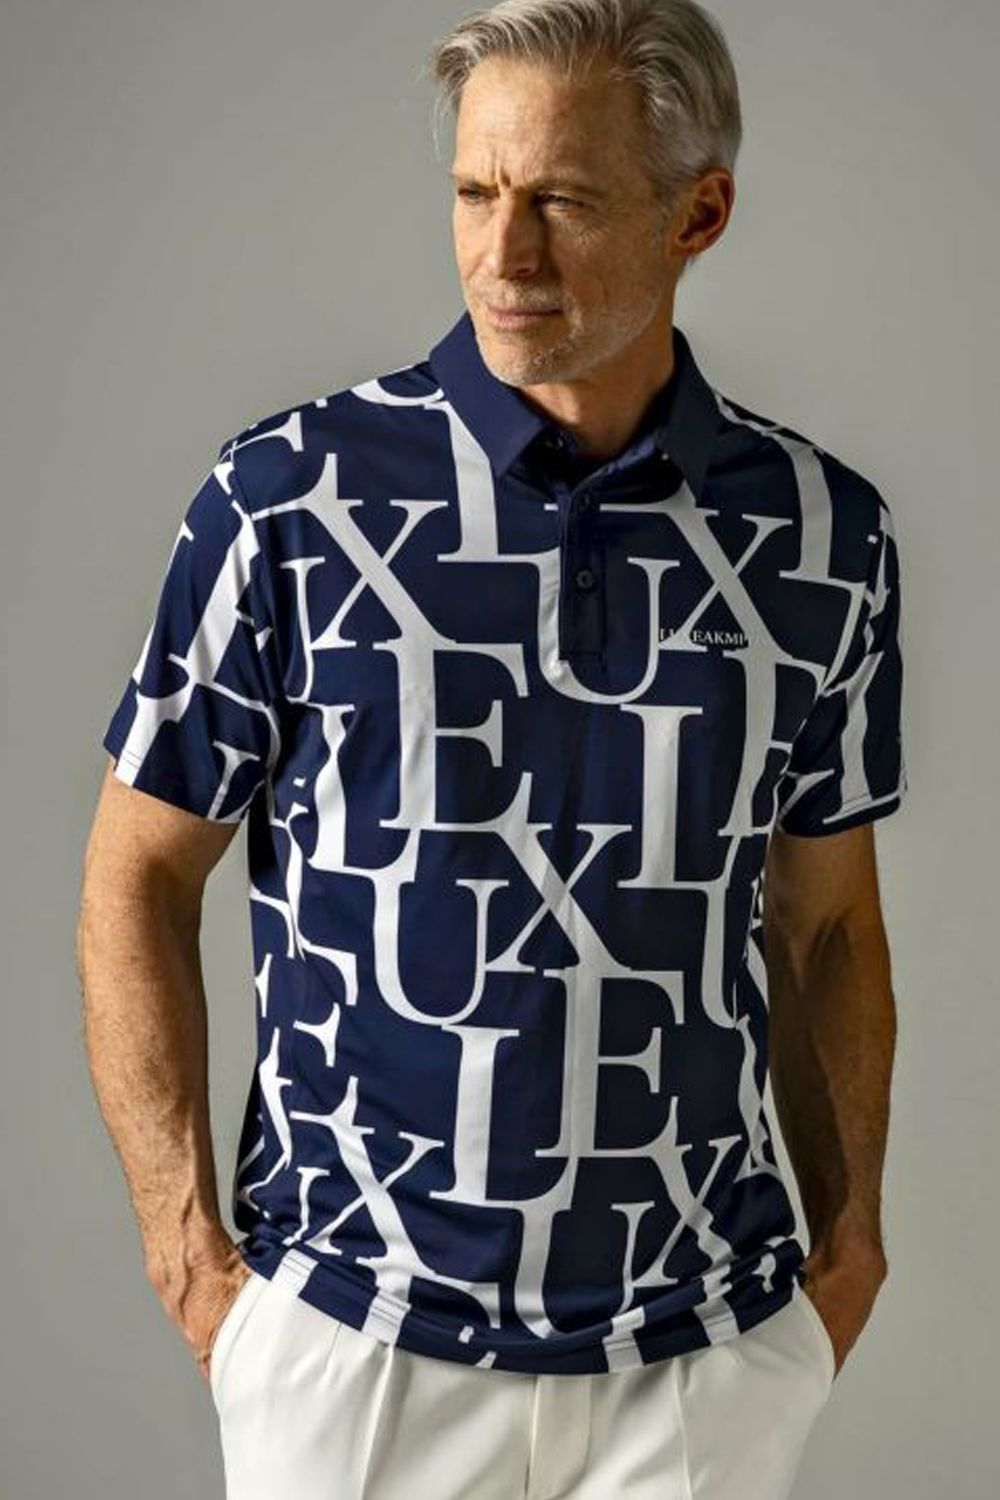 LUXEAKMPLUS - LUXE PATTERN POLO SHIRTS / 総柄ロゴ 半袖ポロシャツ